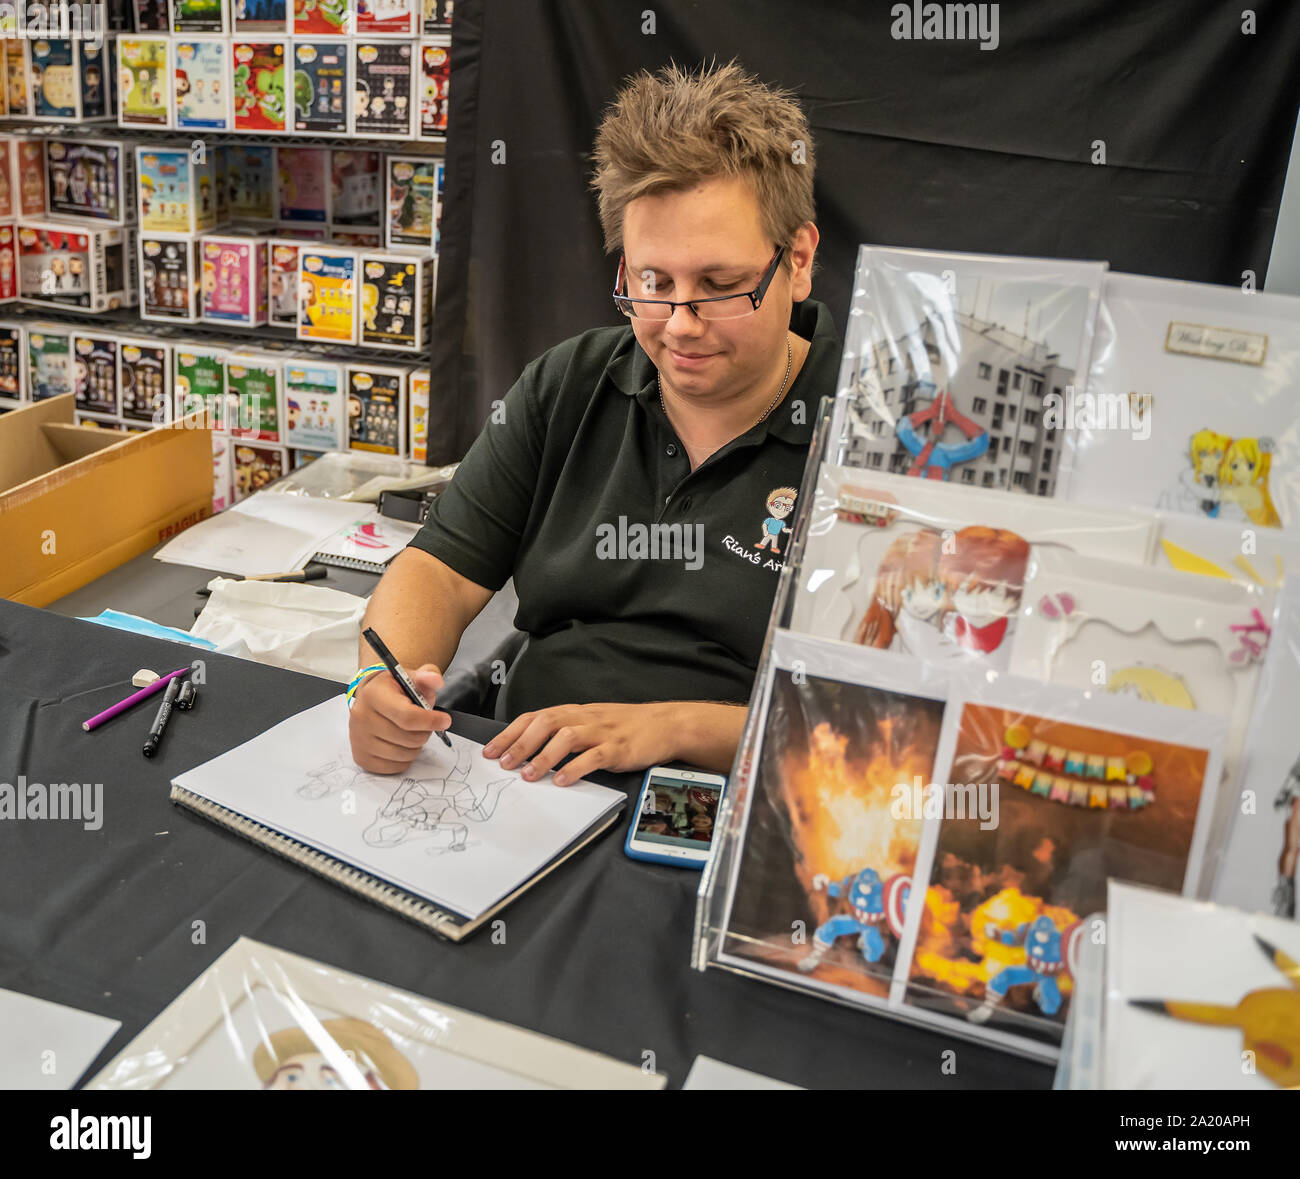 A young male artist demonstrating how to draw Japanese Manga and anime  artwork at the annual Nor-Con movie and comic book convention Stock Photo -  Alamy